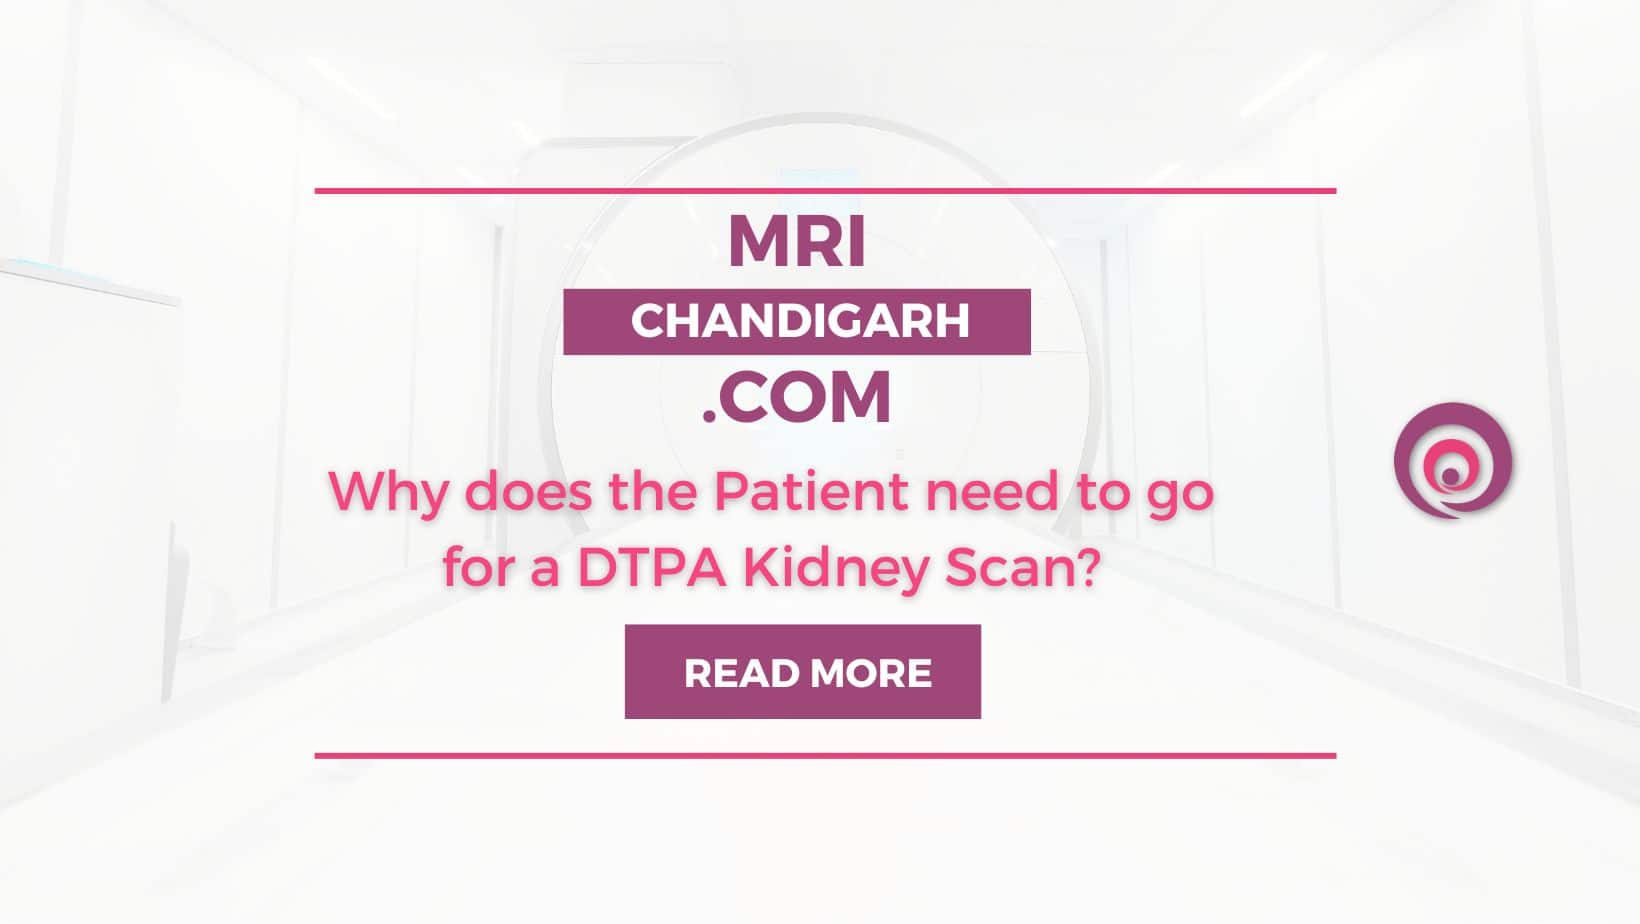 Why does the Patient need to go for a DTPA Kidney Scan?